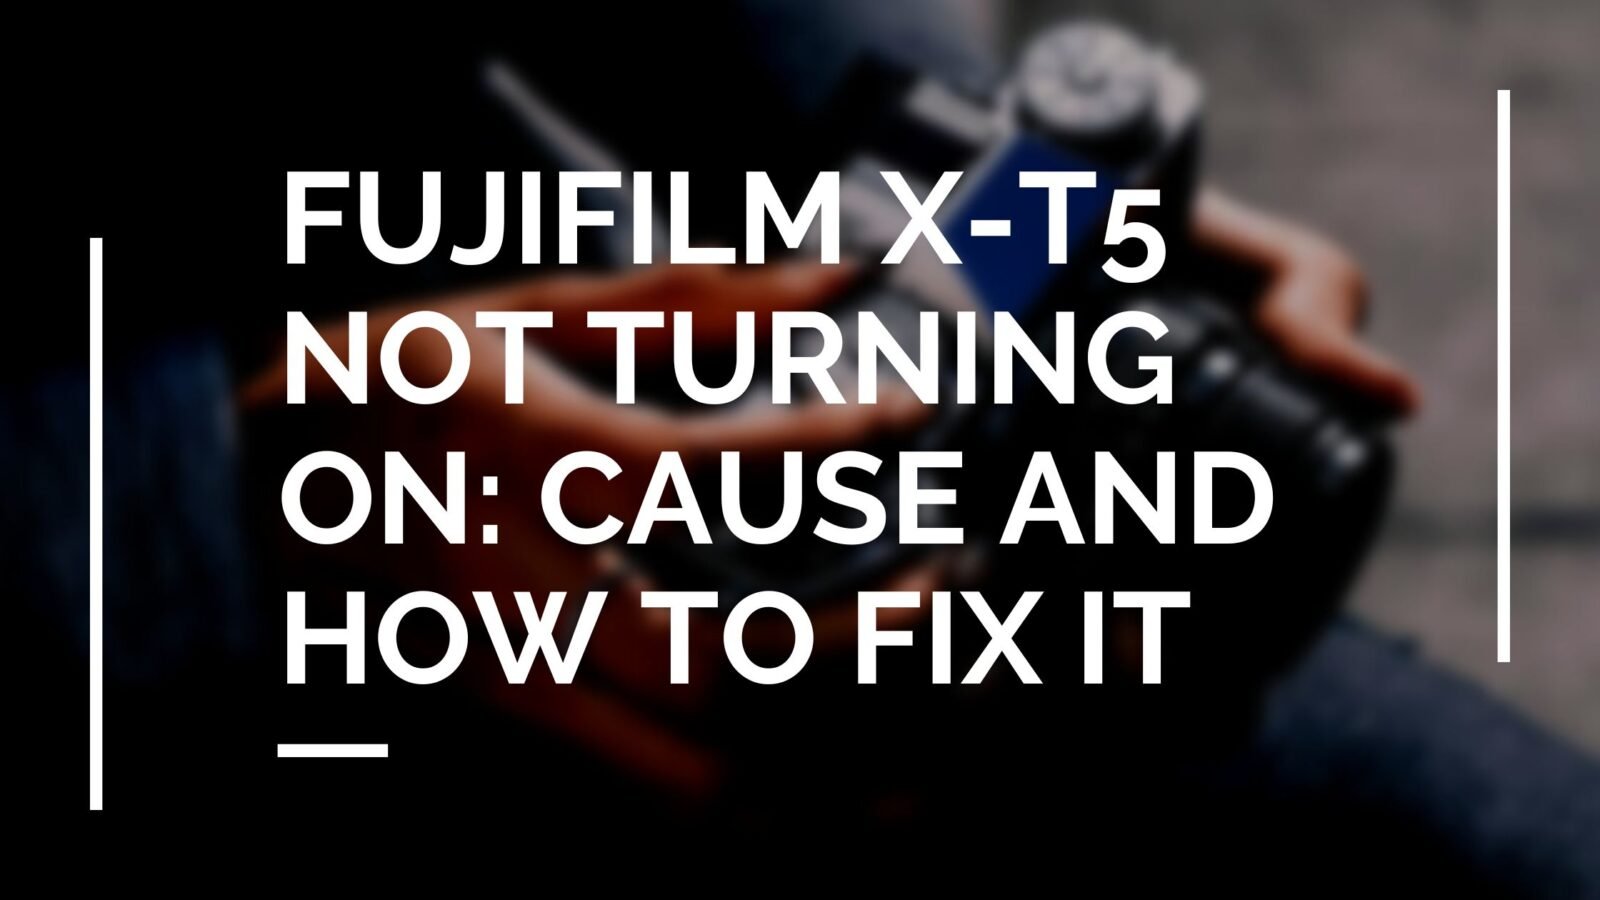 Fujifilm X-T5 Not Turning On: Cause and How To Fix It